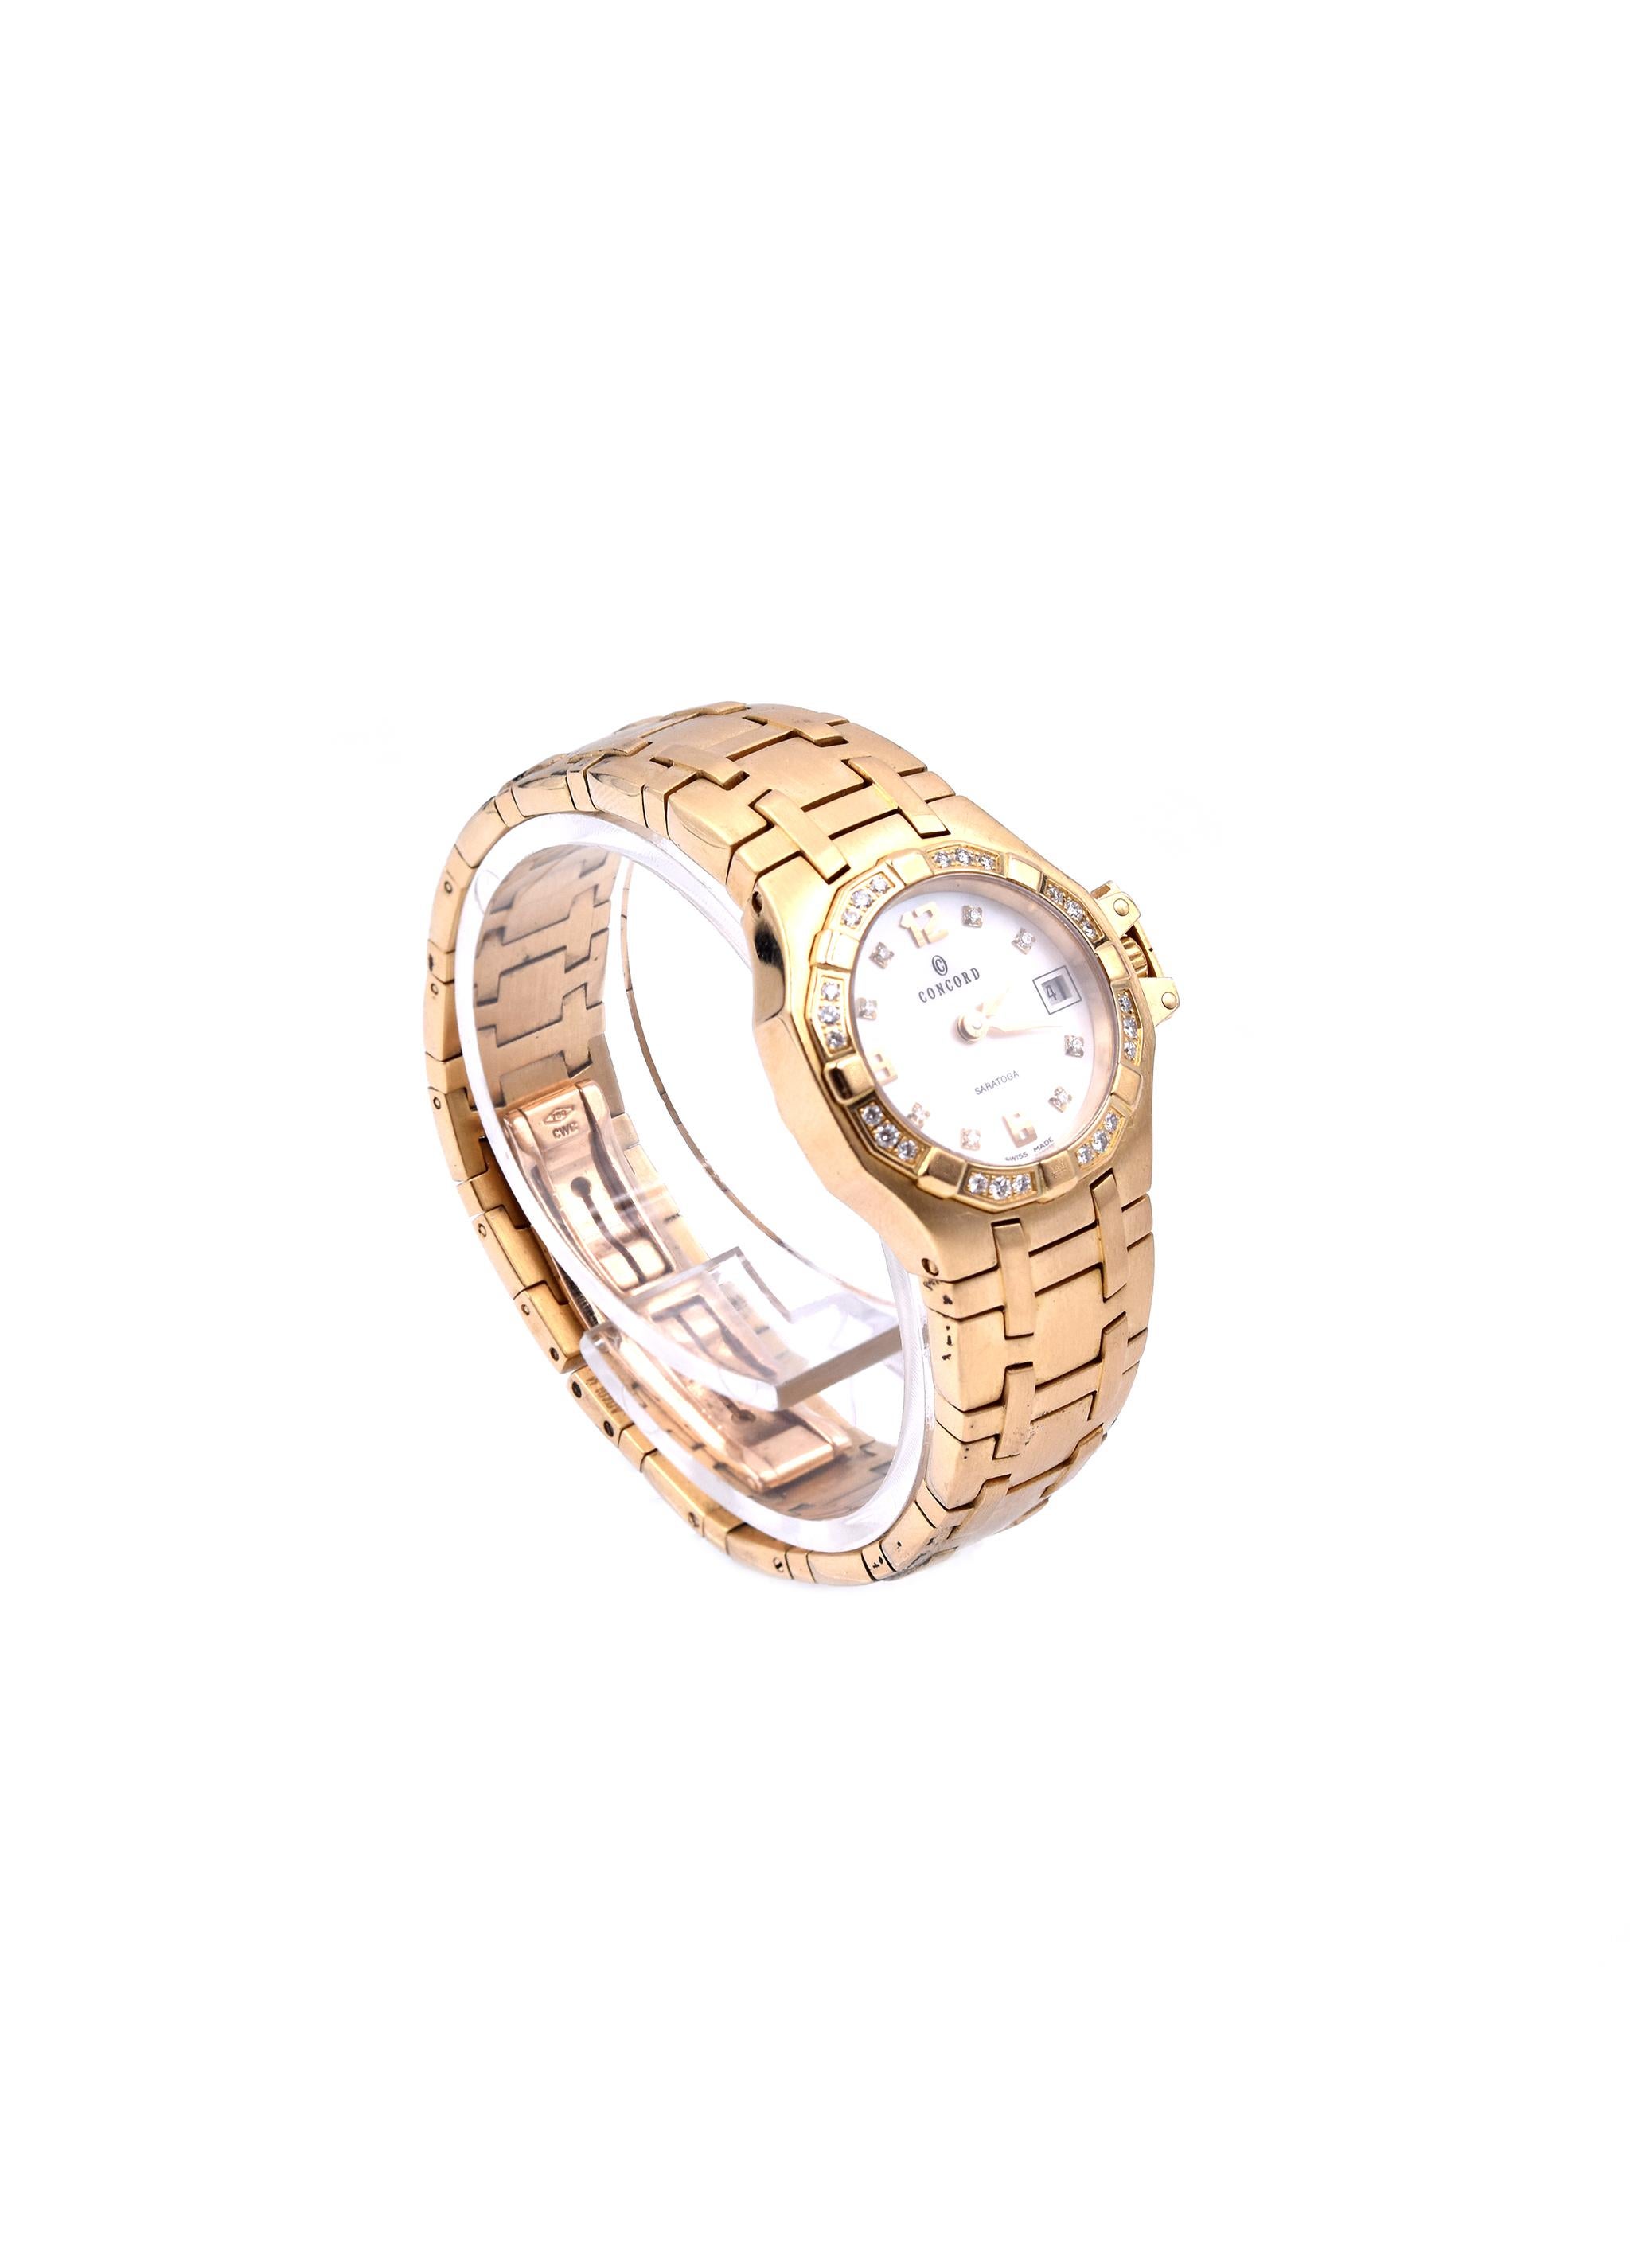 Movement: quartz
Function: hours, minutes, date
Case: 25mm 18K yellow gold round case, sapphire crystal, pull/push crown, water resistant, diamond bezel
Dial: white mother of pearl dial with diamond and arabic numerals
Band: 18k yellow gold bracelet